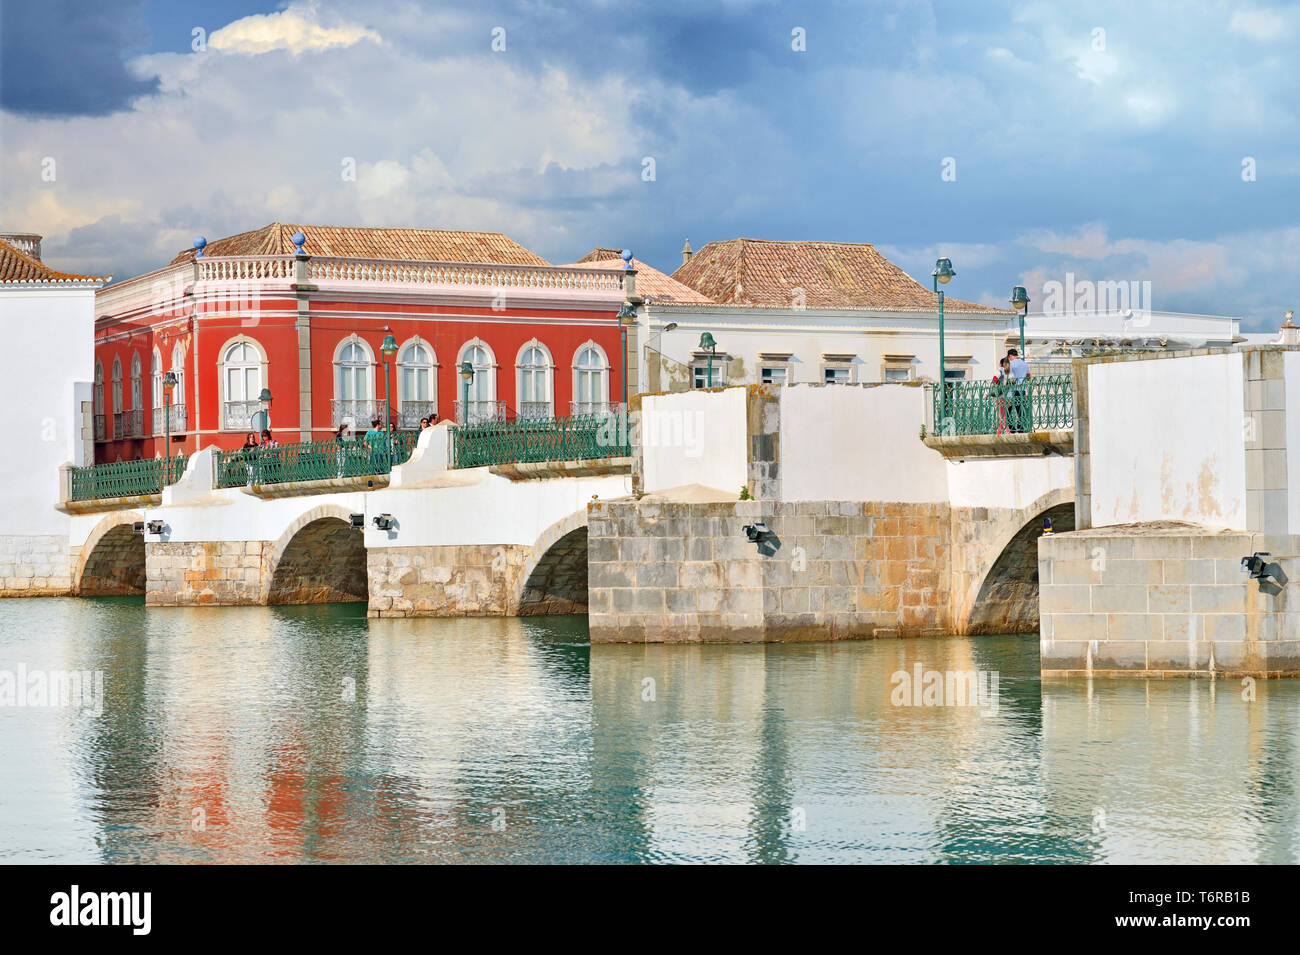 Side view of Romanesque bridge over calm river and historic buildings Stock Photo